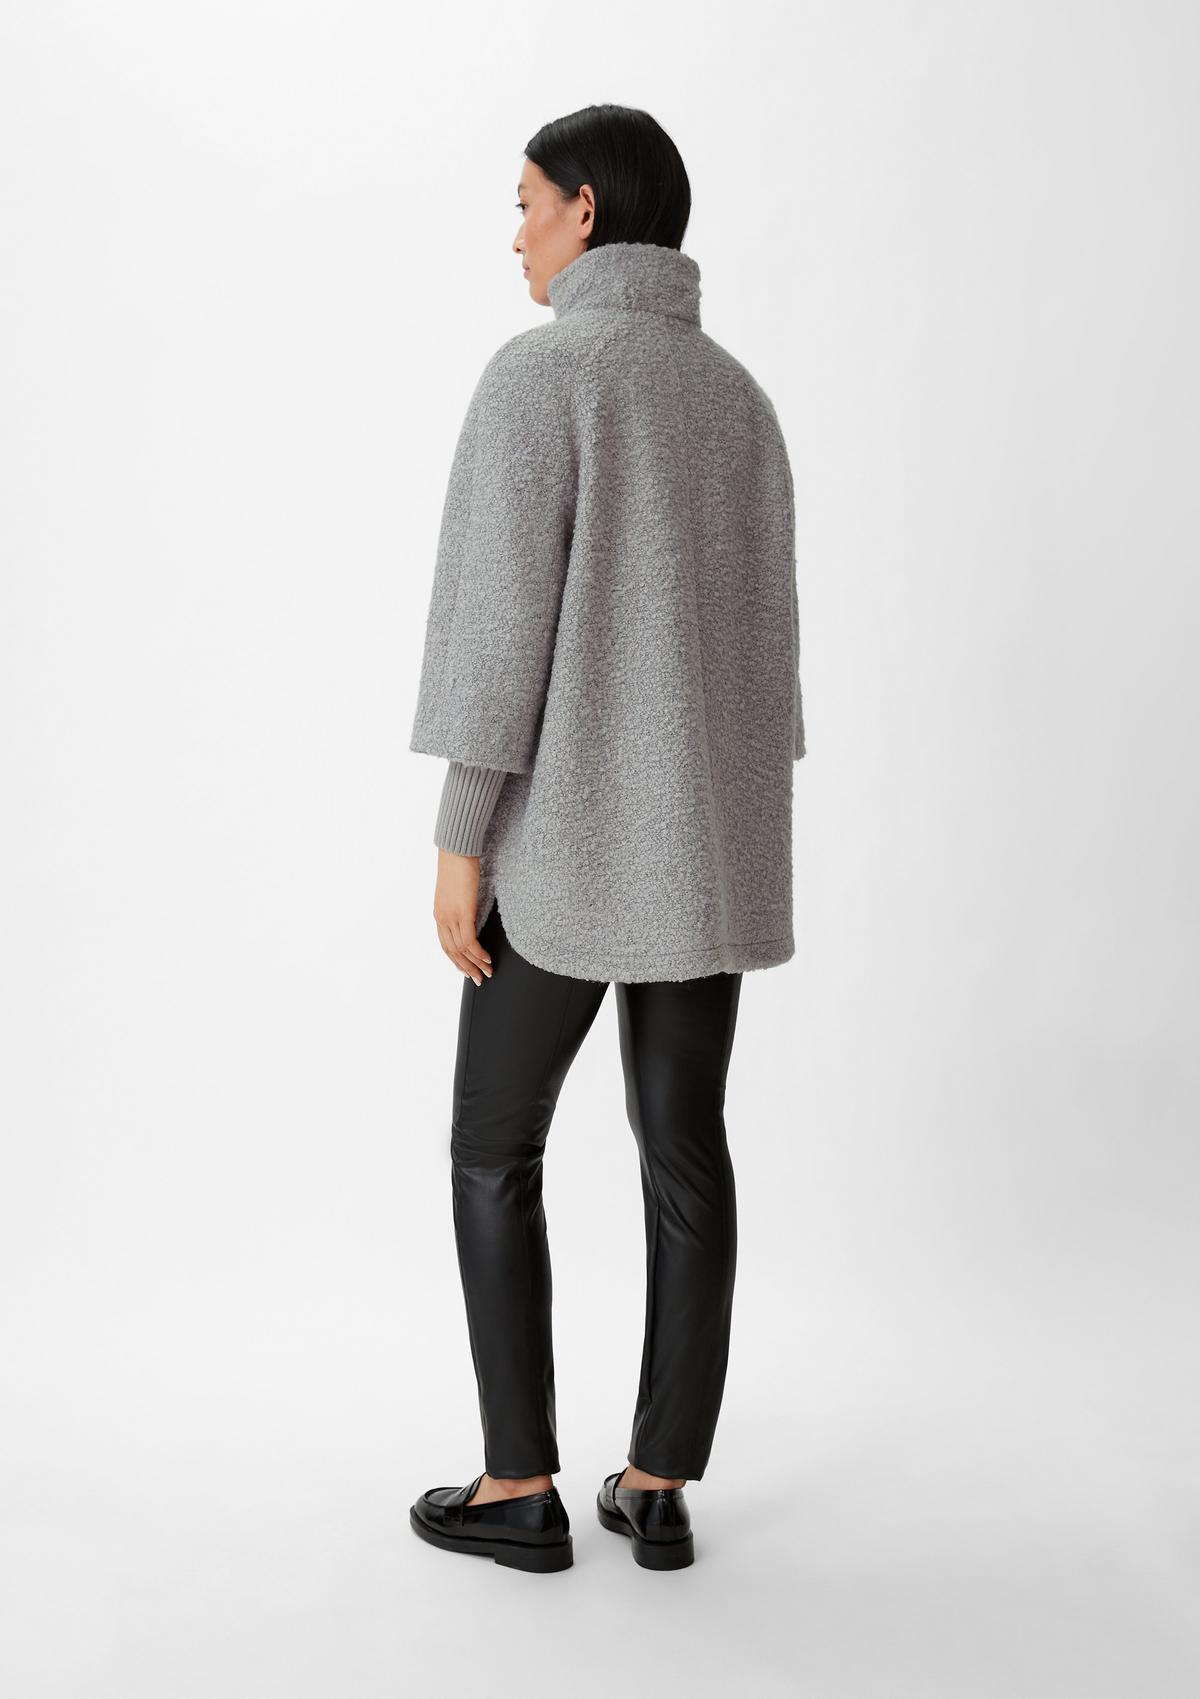 comma Bouclé Jacket in a layering look